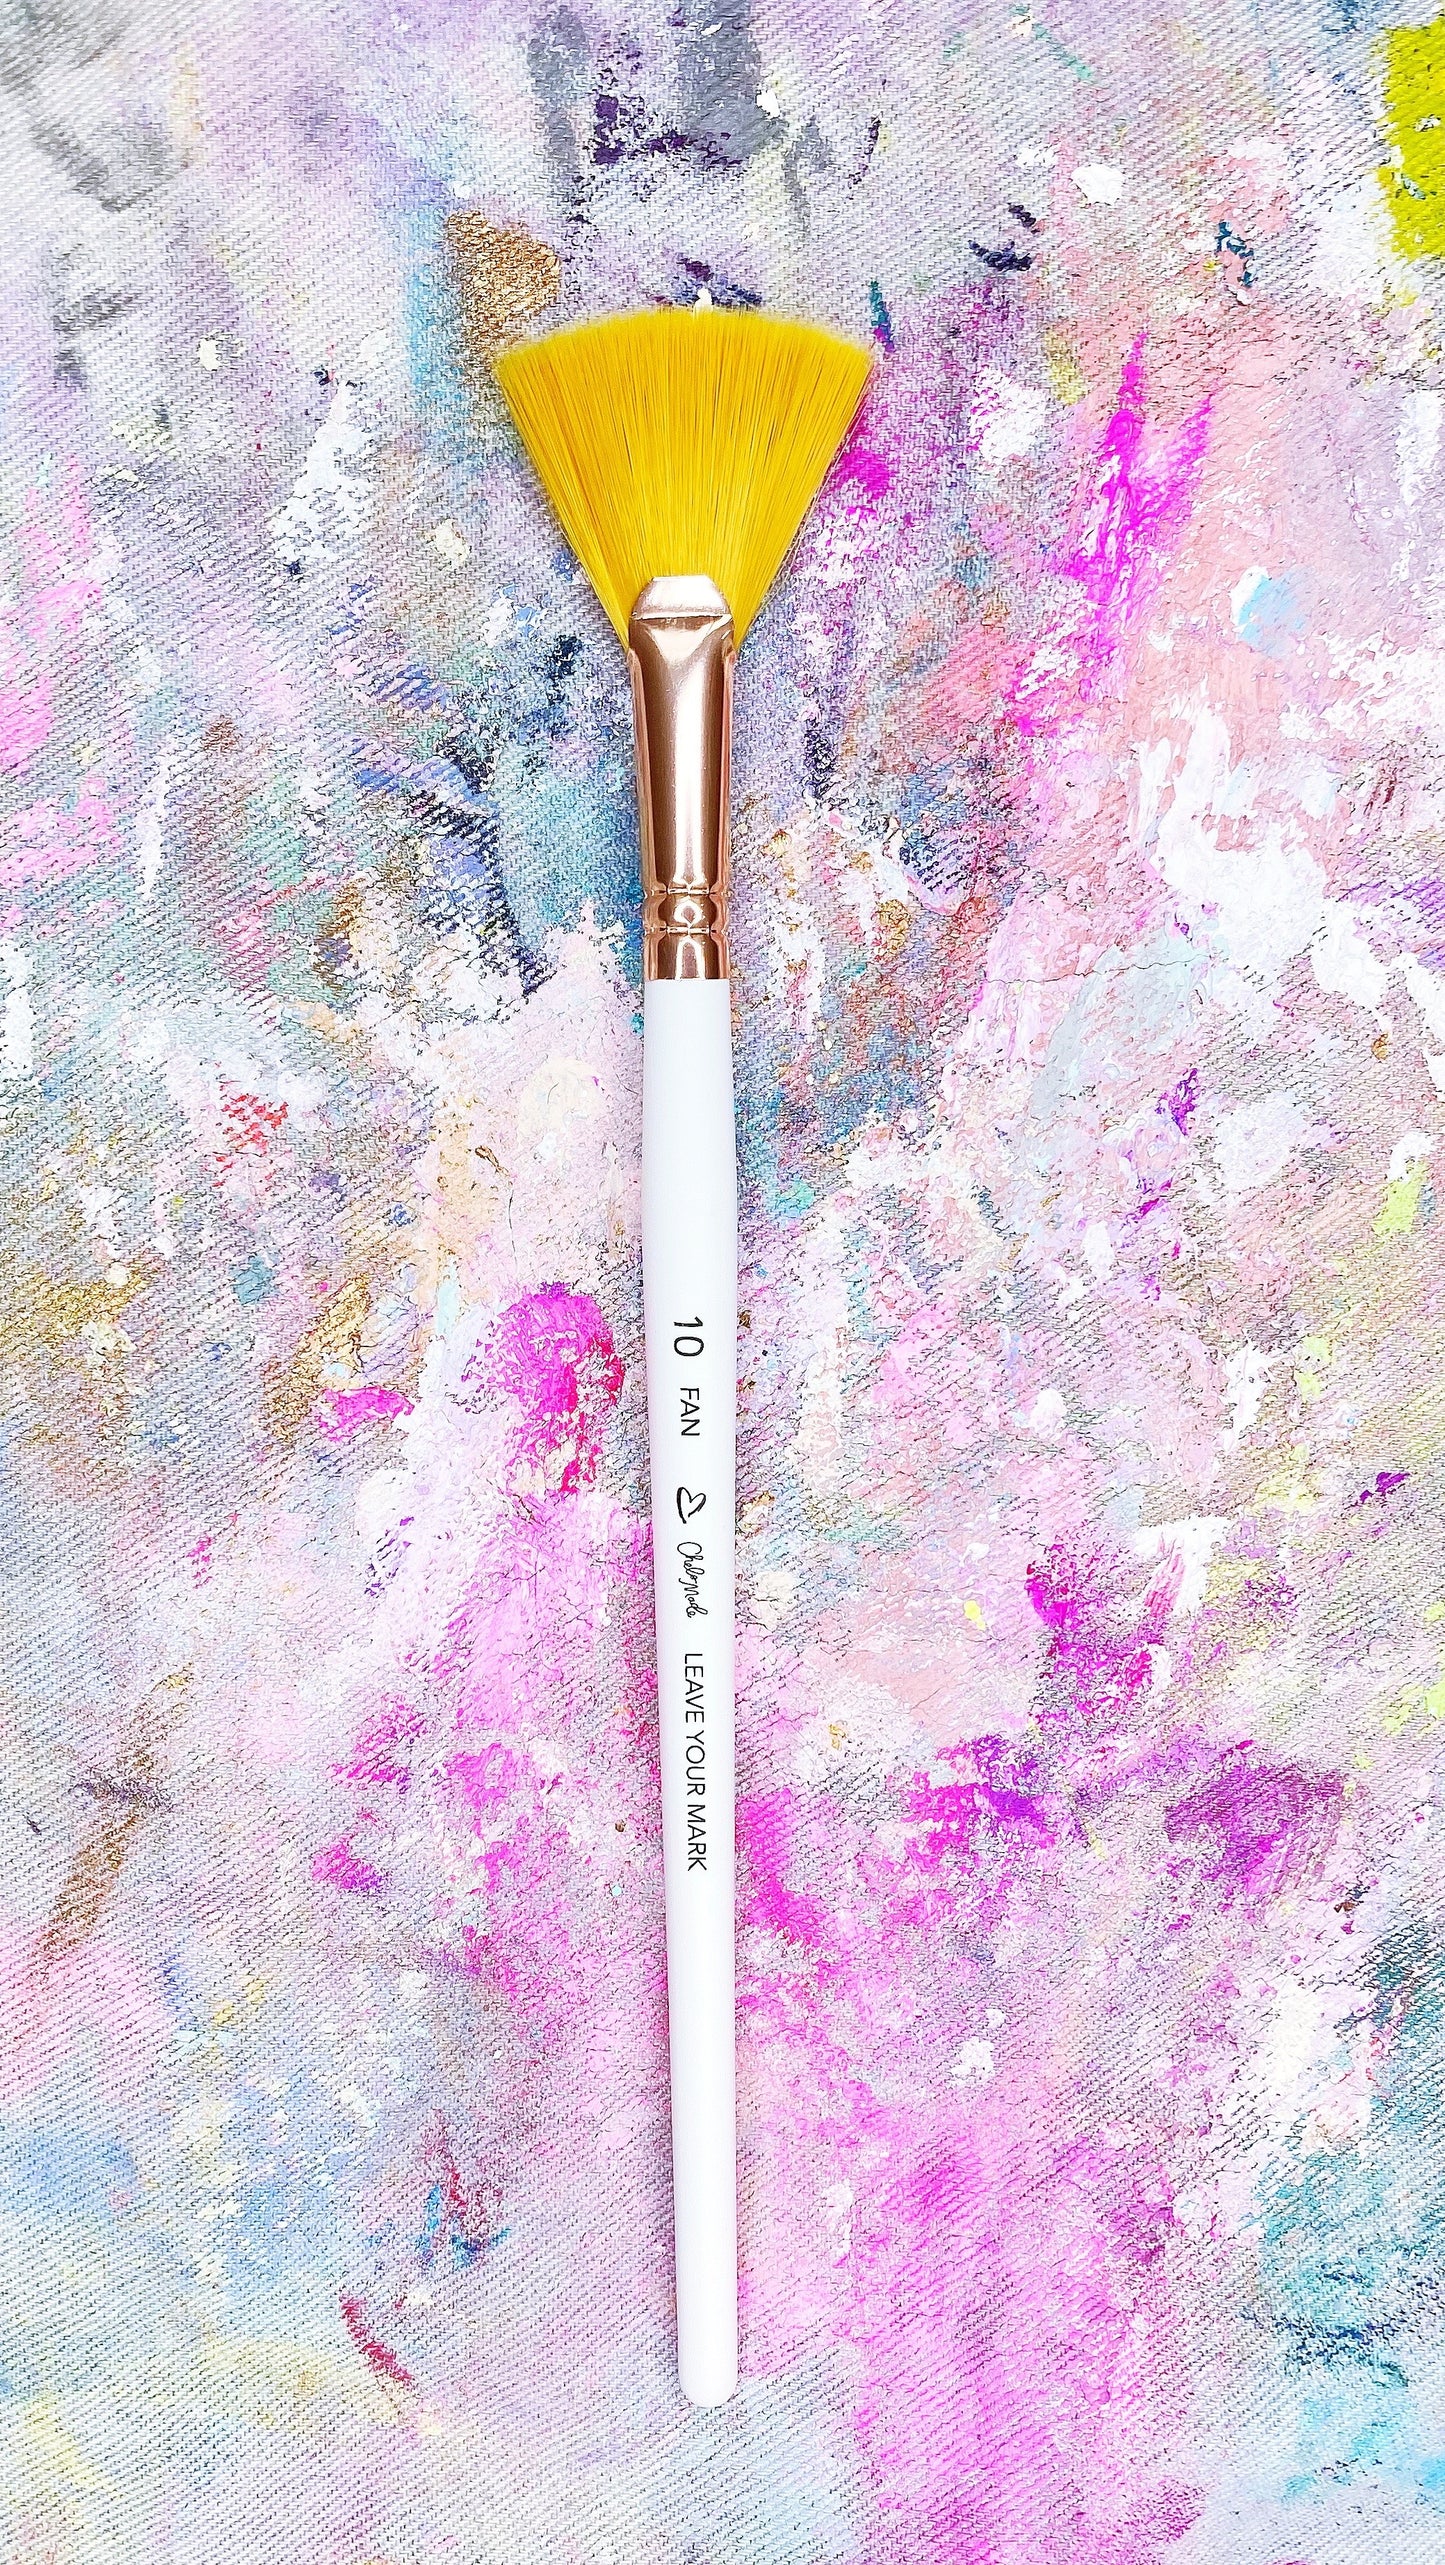 Leave Your Mark + The Luckiest Brush Sets